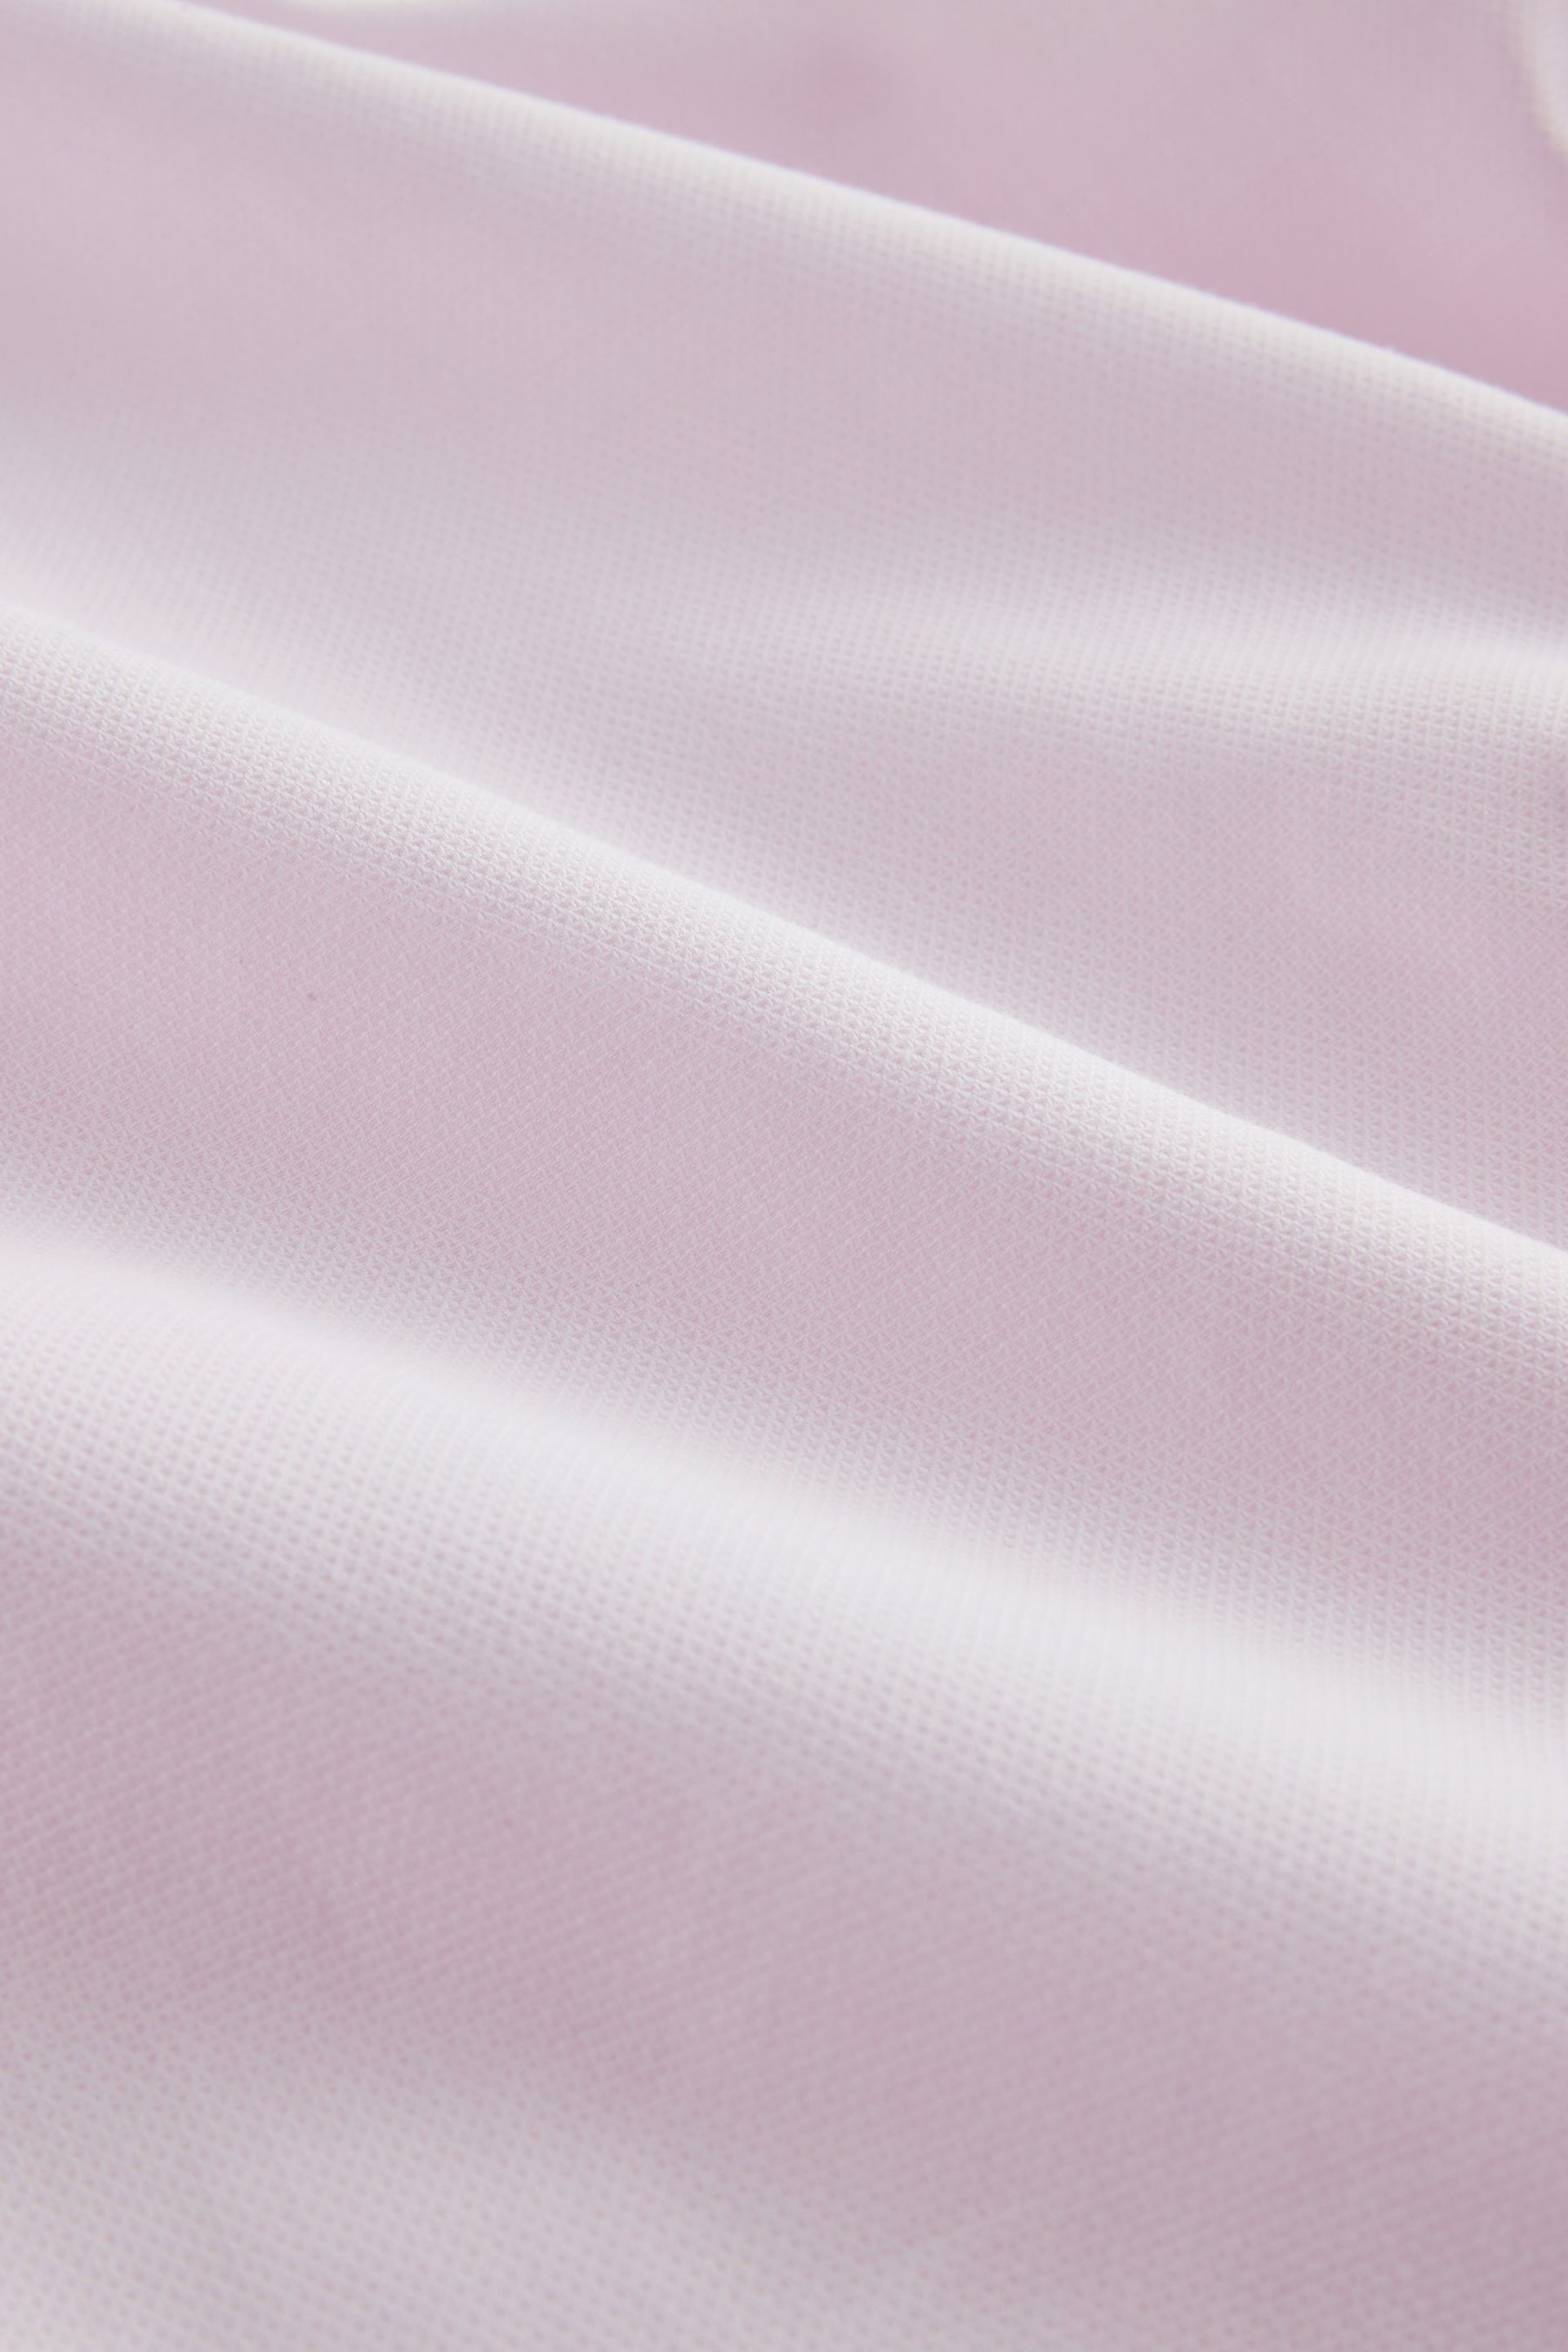 Light Pink Slim Fit Single Cuff Easy Care Textured Shirt - Image 5 of 6